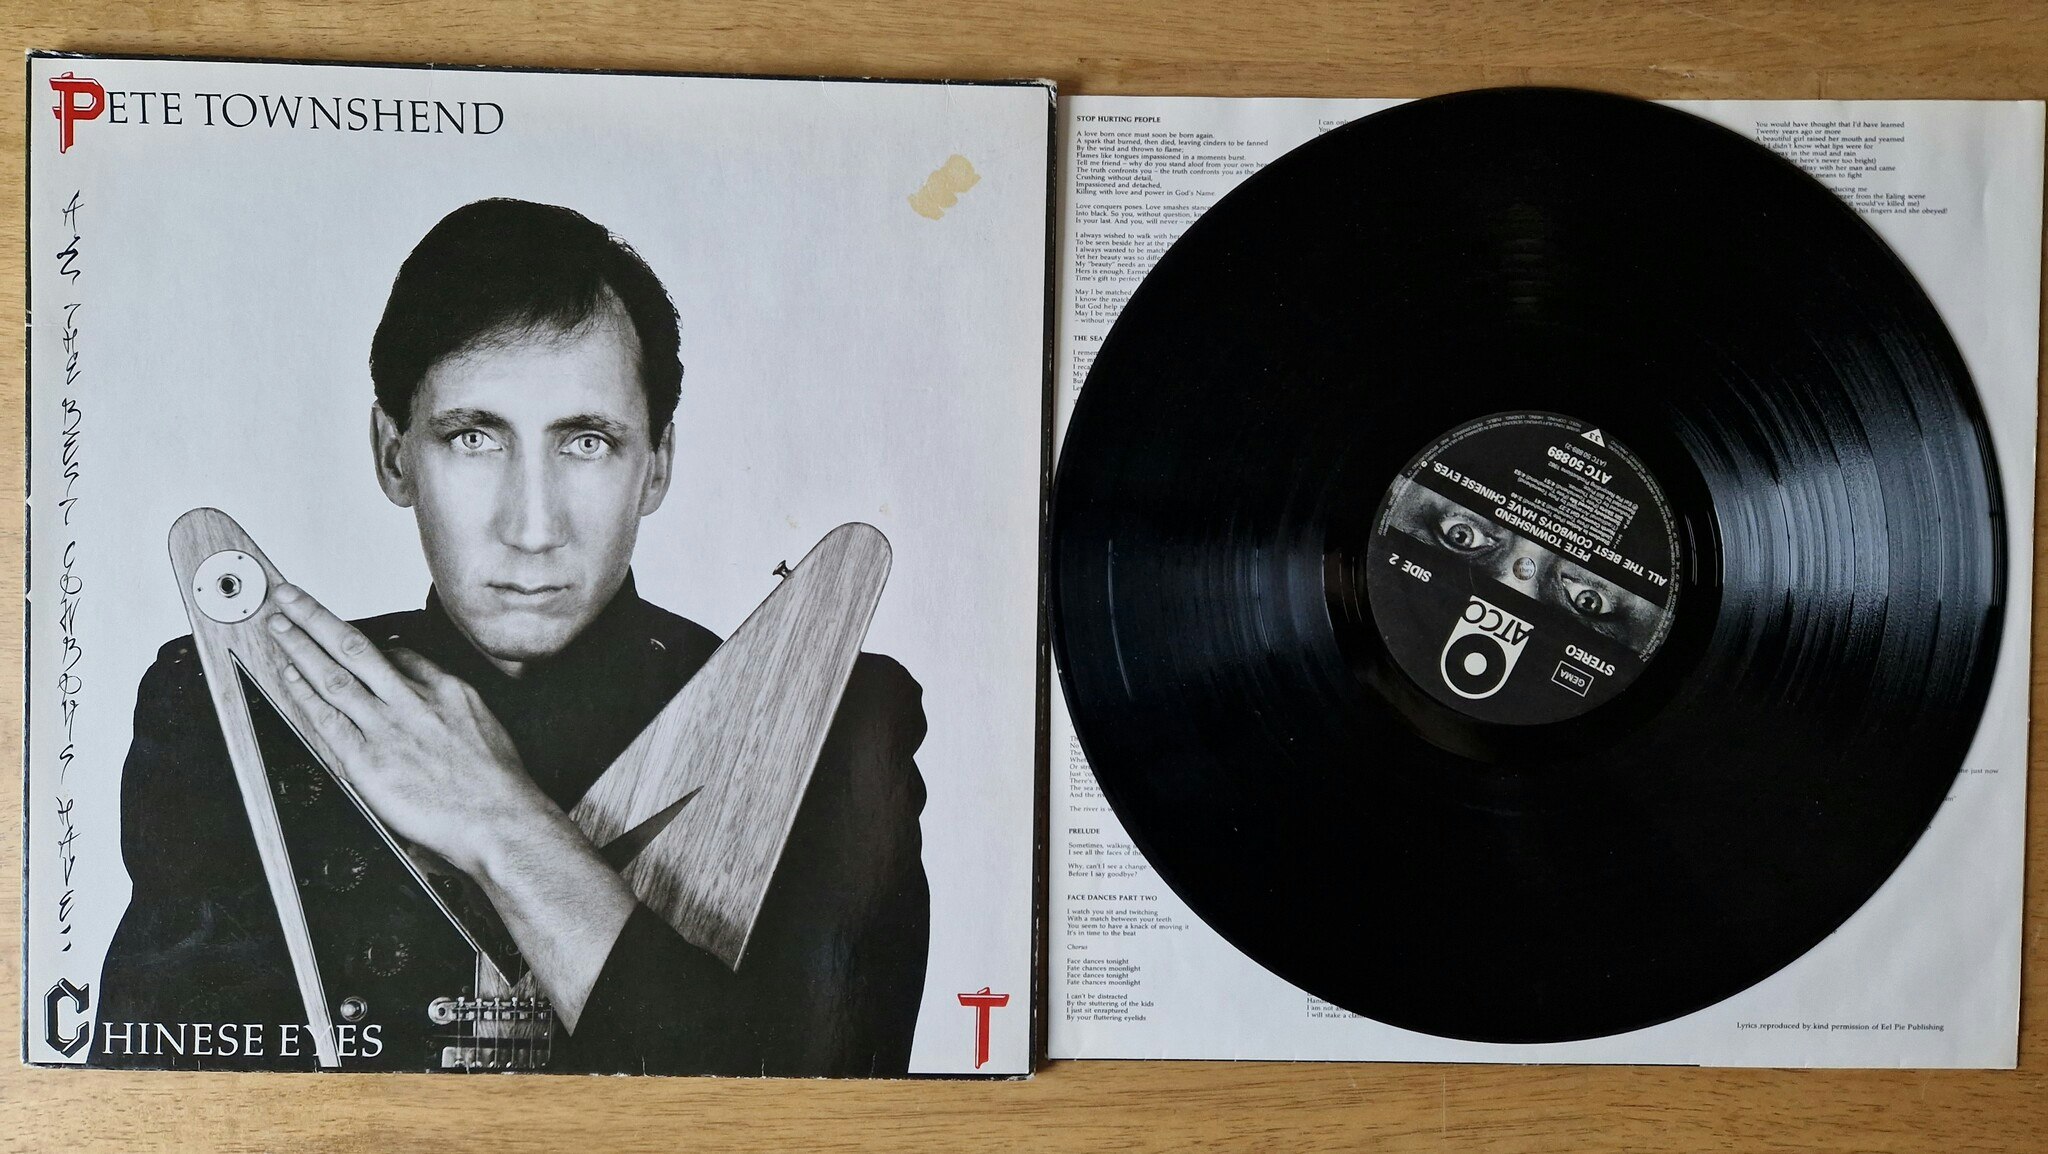 Pete Townshend, All the best cowboys have chinese eyes. Vinyl LP